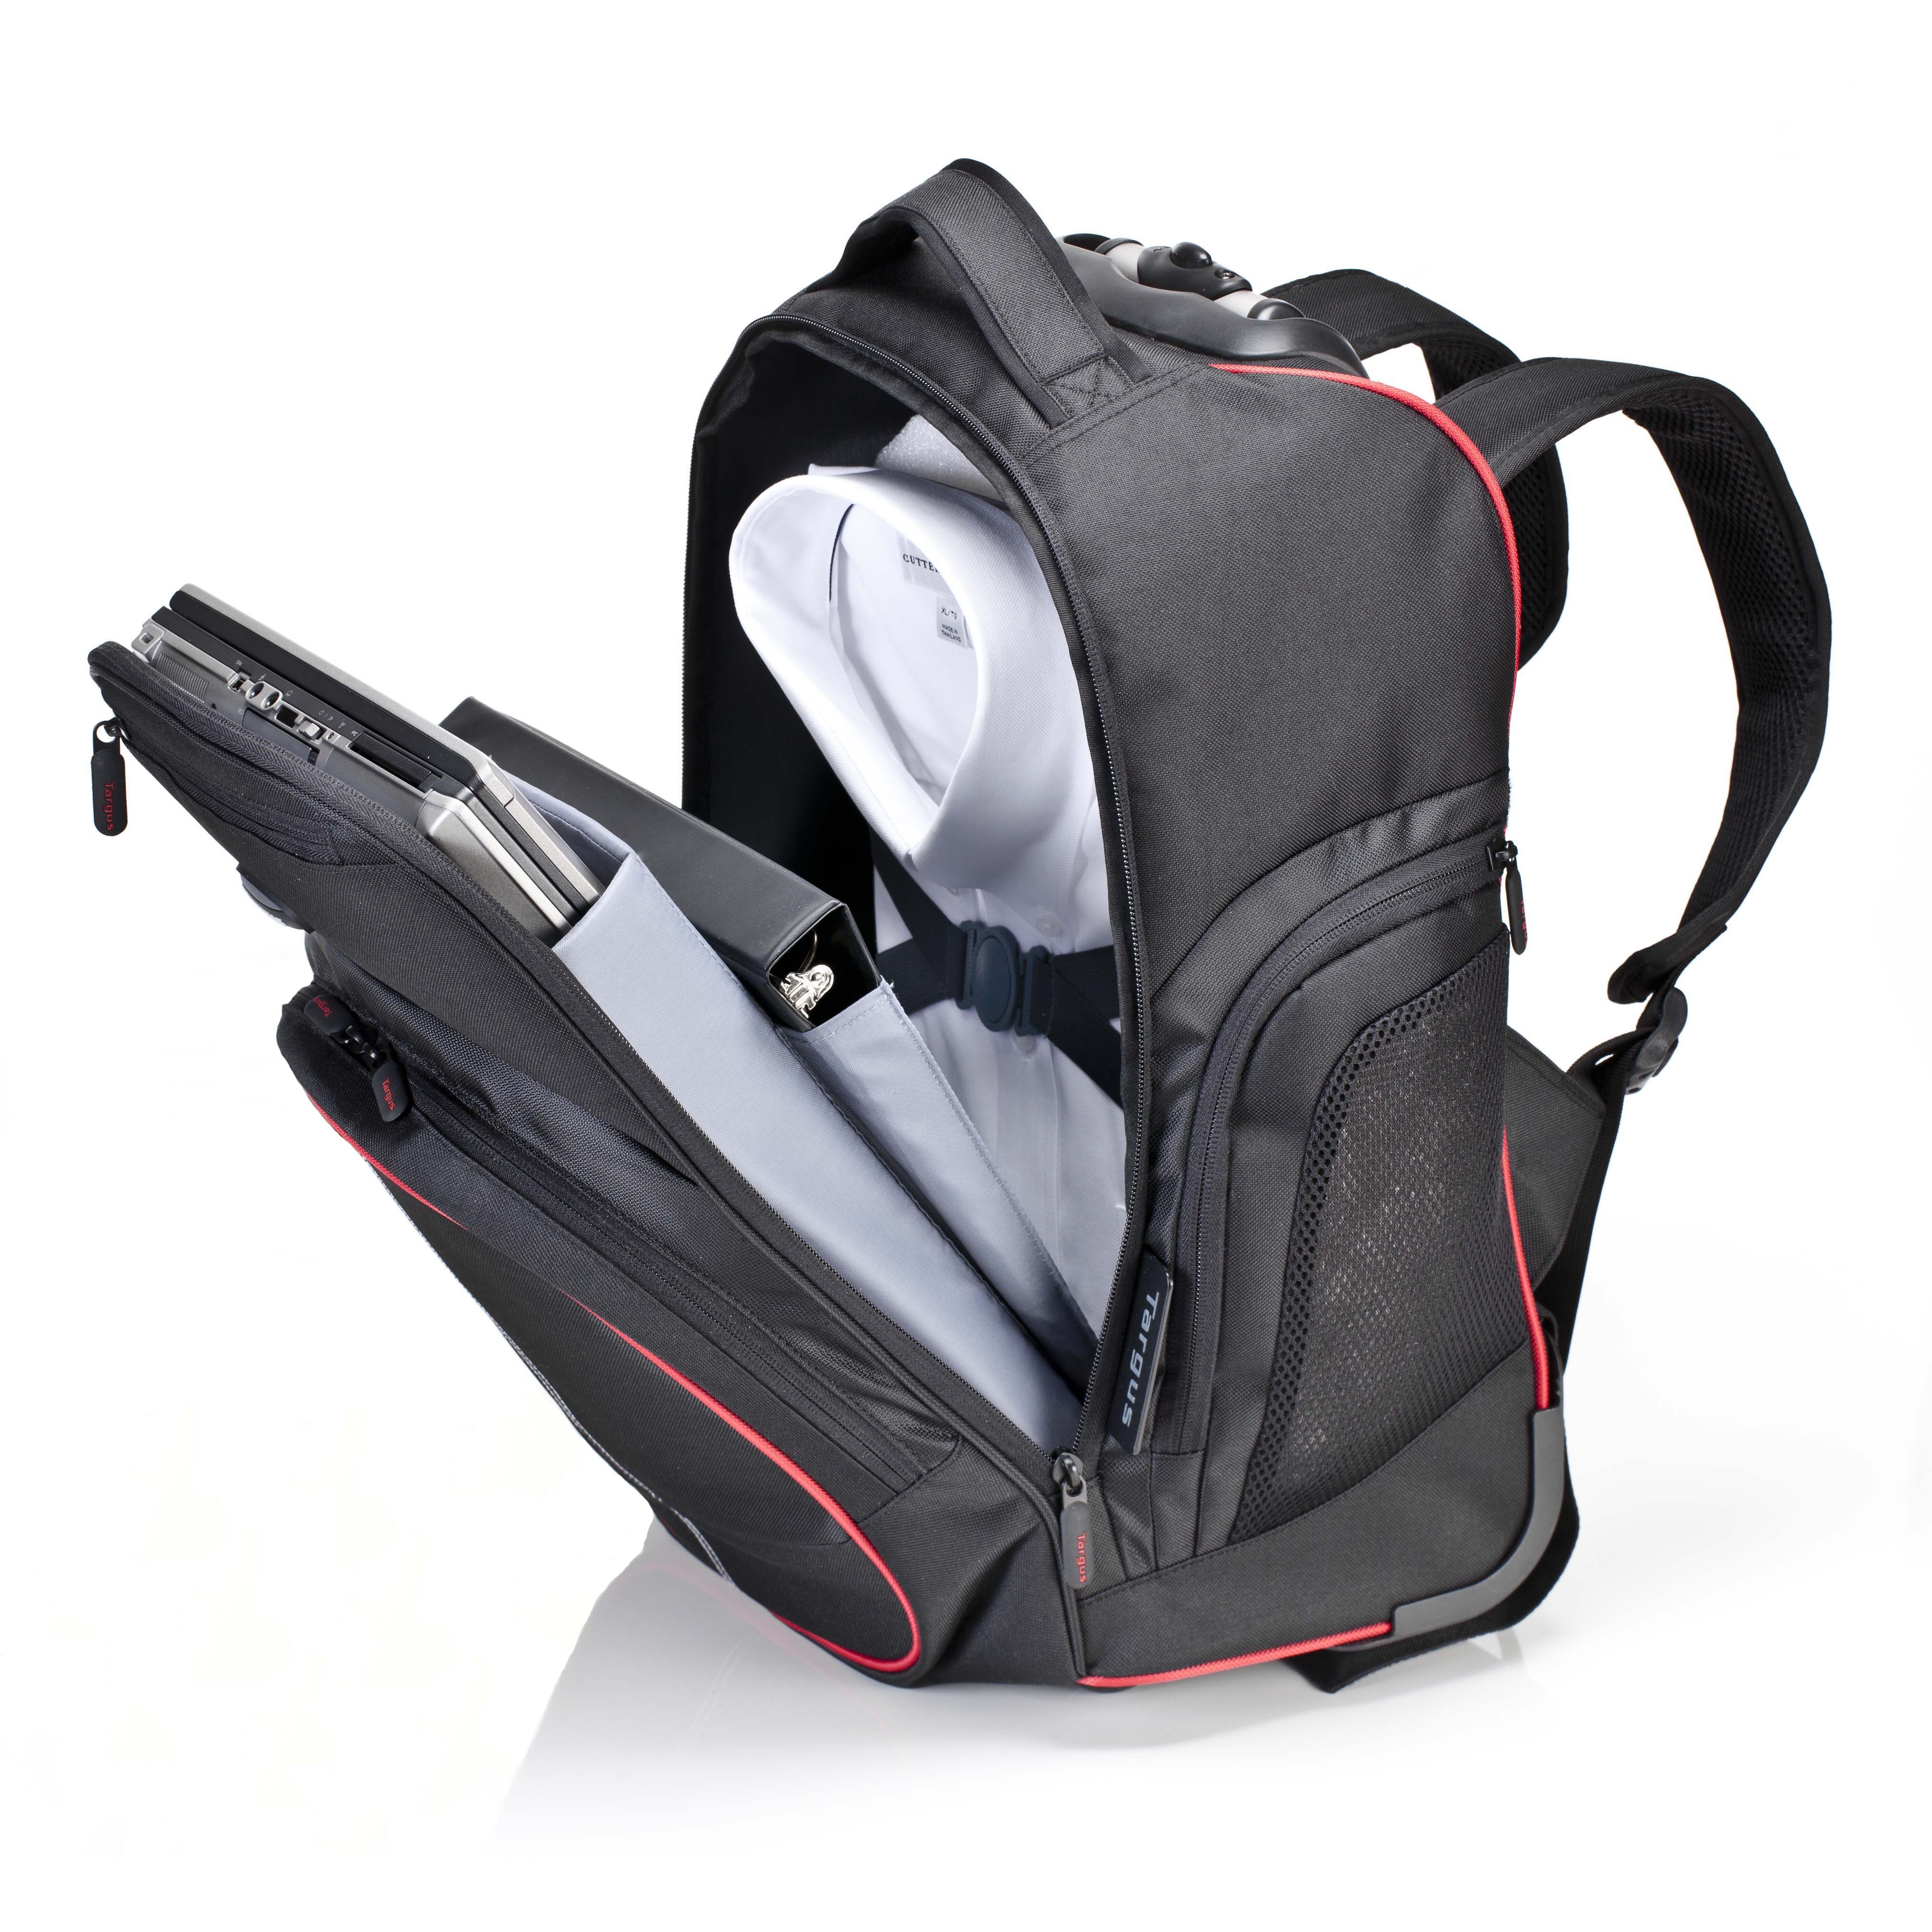 16” Compact Rolling Backpack - TSB75001US - Black/Red Accent: Rollers: Targus